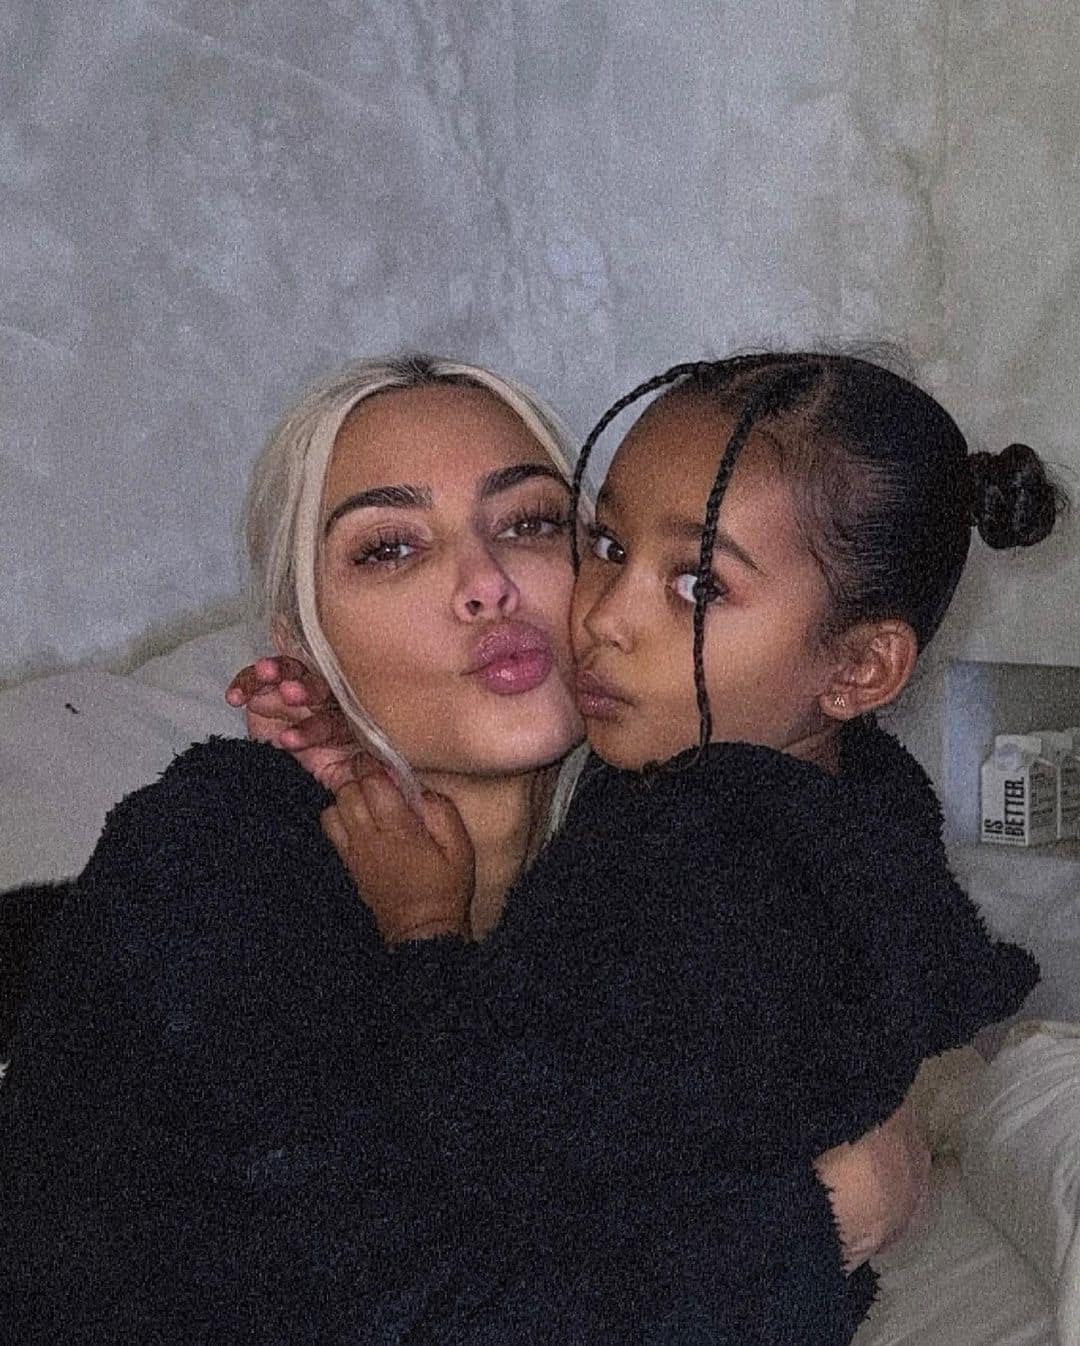 likhoa kim kardashian surprisingly shared moments spent with her precious little angles including chicago north palm and saint on sunday night 653e83782037f Kim Kardashian Surprisingly Shared Moments Spent With Her Precious Little Angles Including Chicago, North, Palm And Saint On Sunday Night